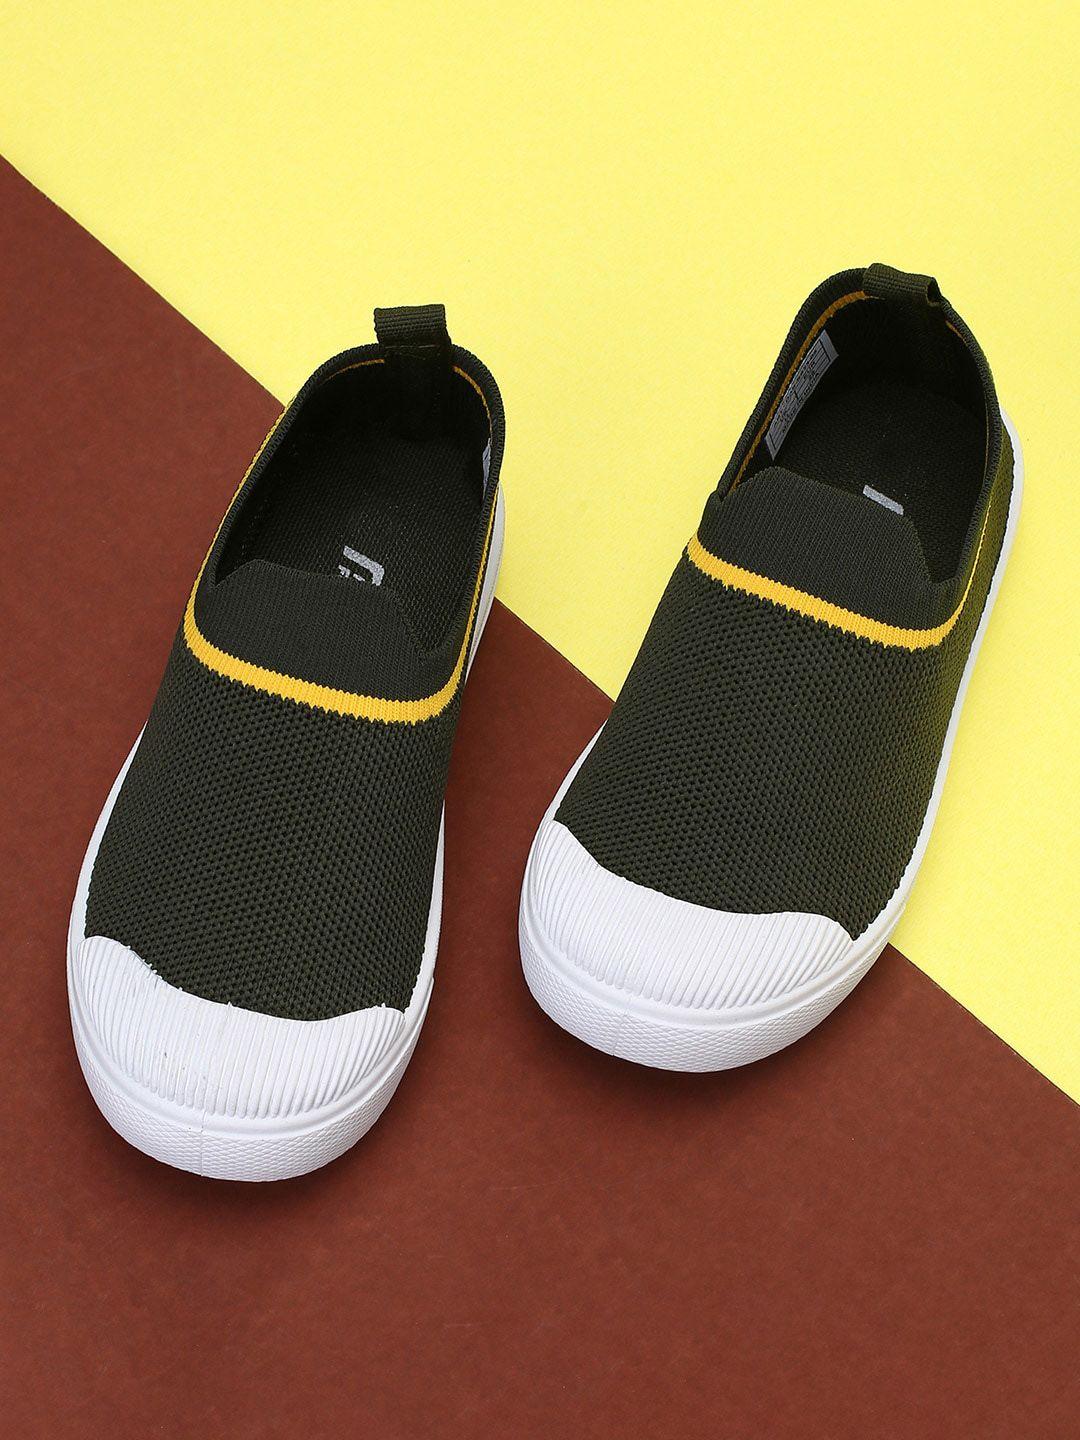 Fame Forever by Lifestyle Boys Woven Design Slip-On Sneakers